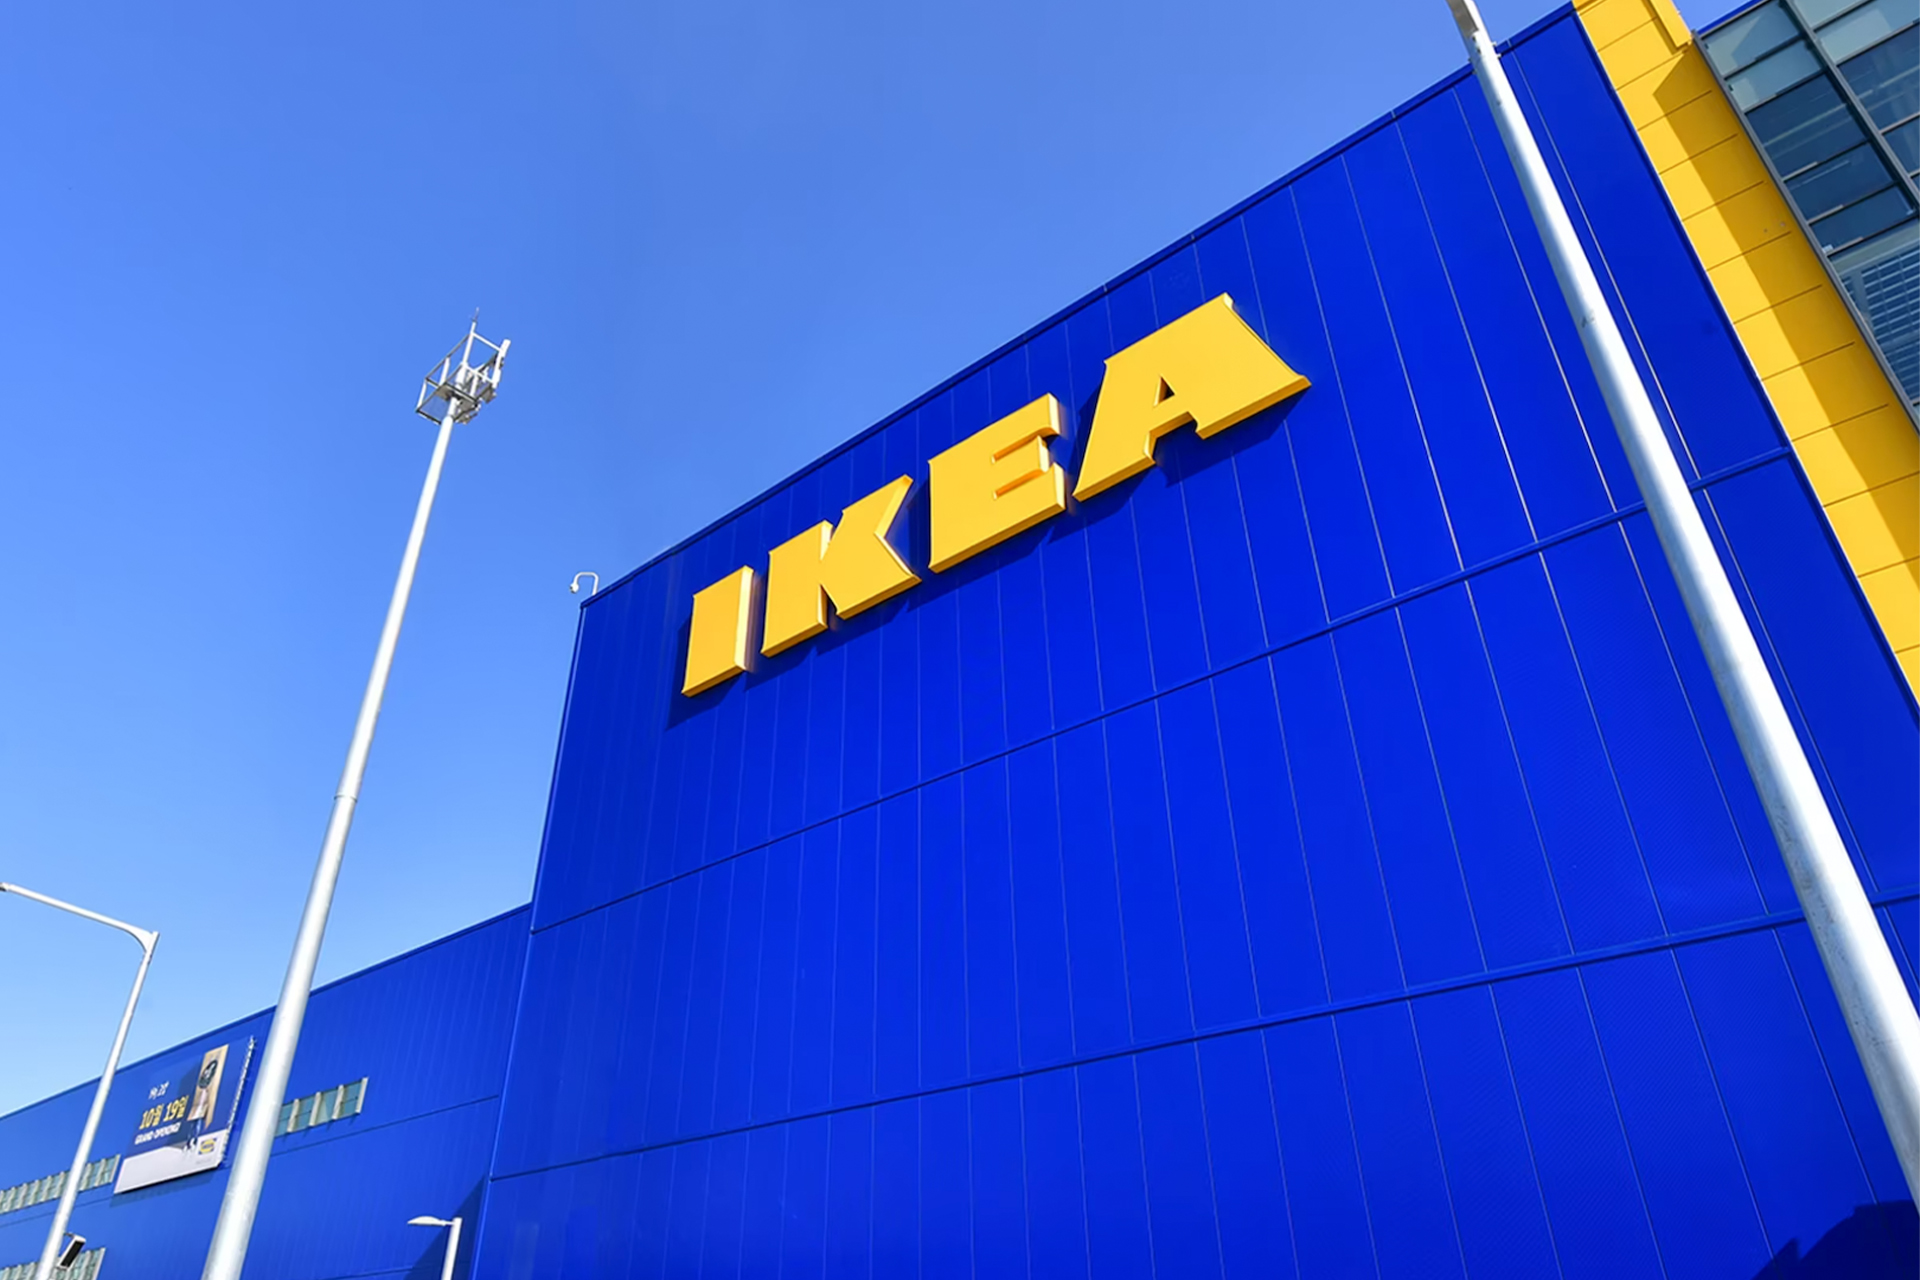 Ikea axes three new U.S. stores as looks to beef up online sales